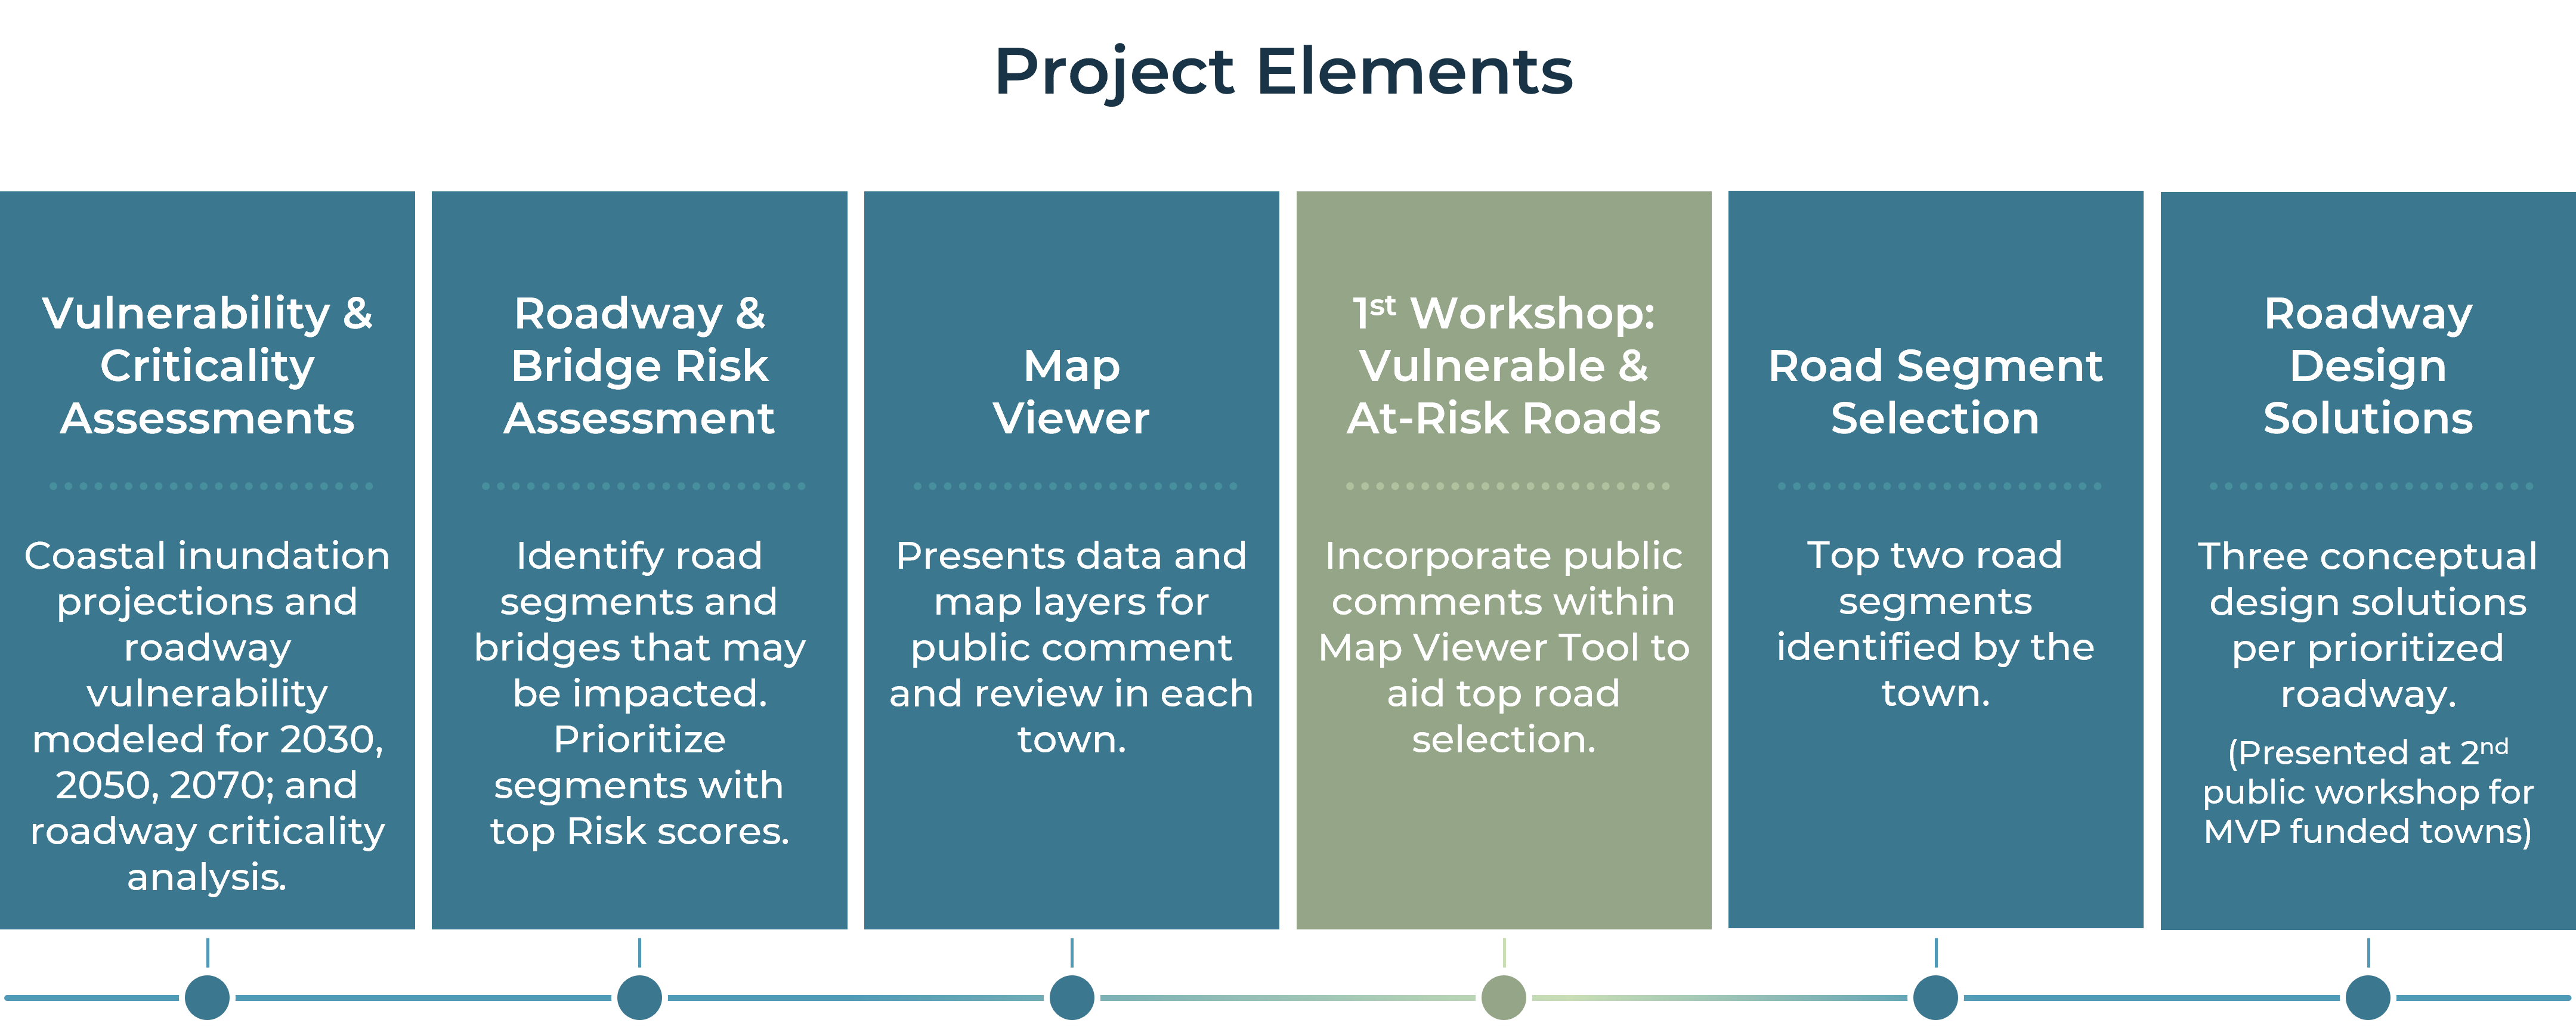 Project elements consist of a vulnerability and criticality assessment, roadway and bridge risk assessment, map viewer and public comment tool, a first workshop detailing vulnerable and at risk roads, road segment selection by town, and roadway design solutions which are presented at the second public workshop for each MVP funded town.